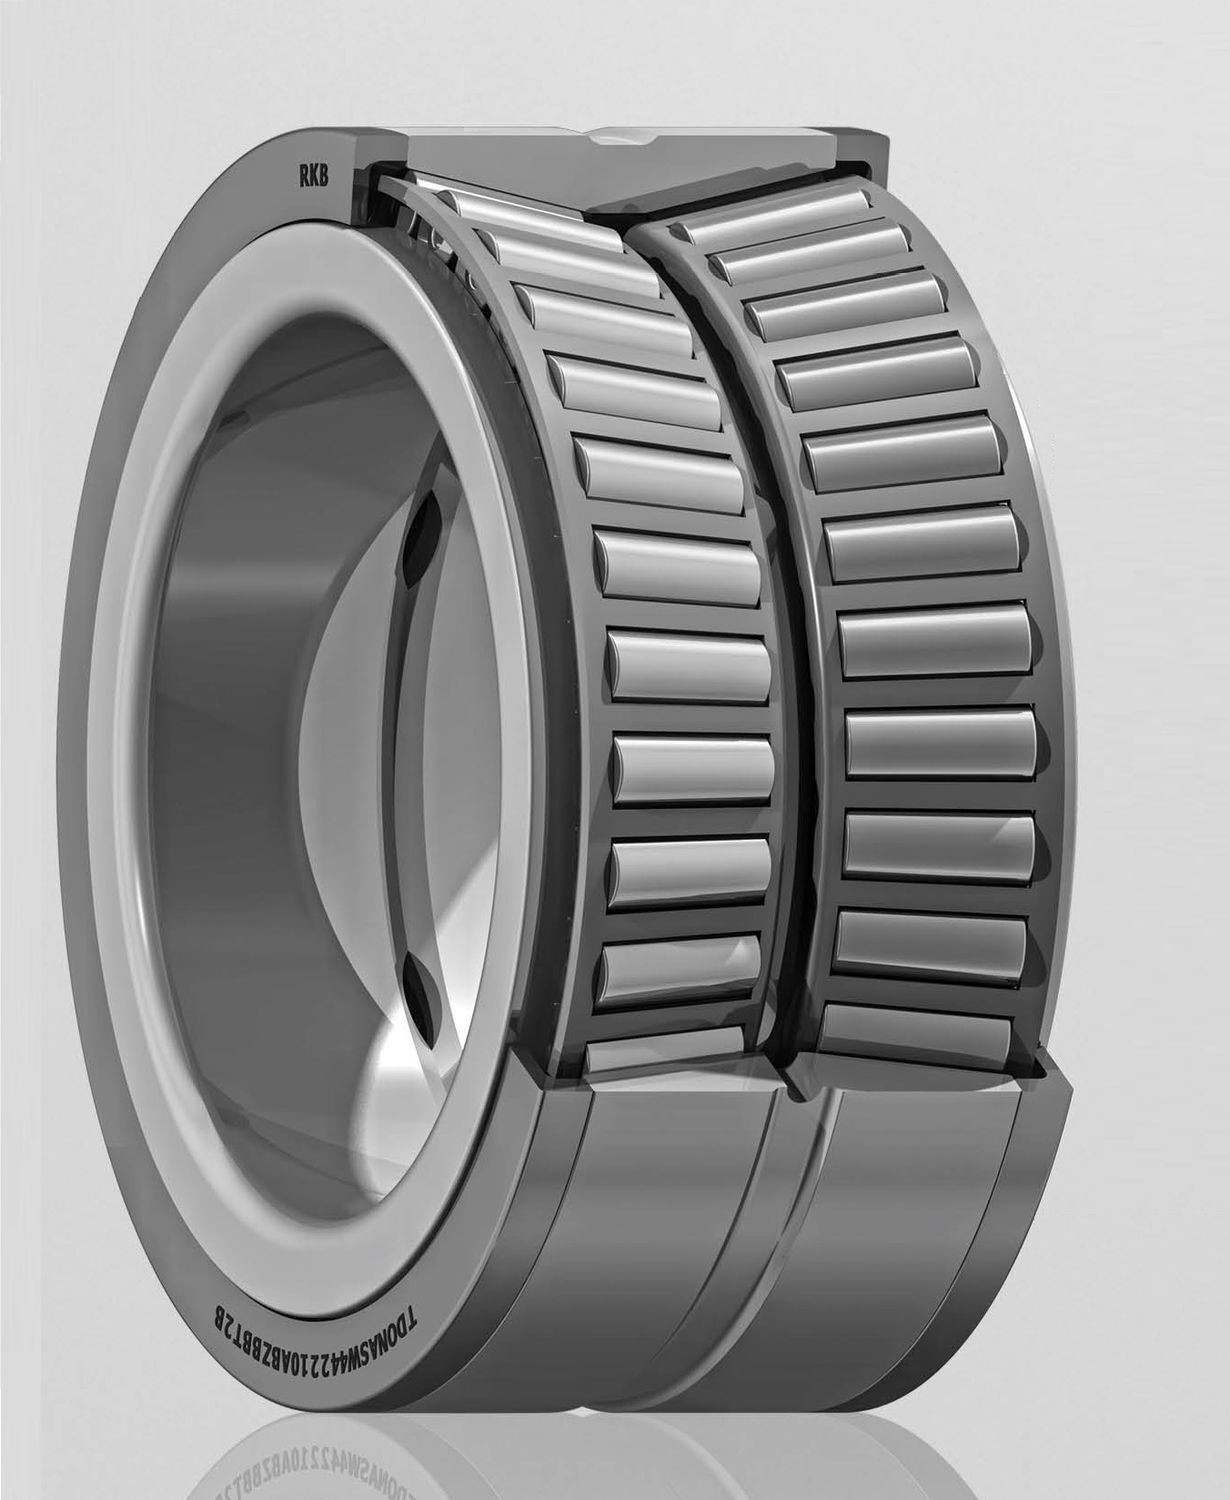 NTN BALL BEARING SUPPLIERS IN INDIA